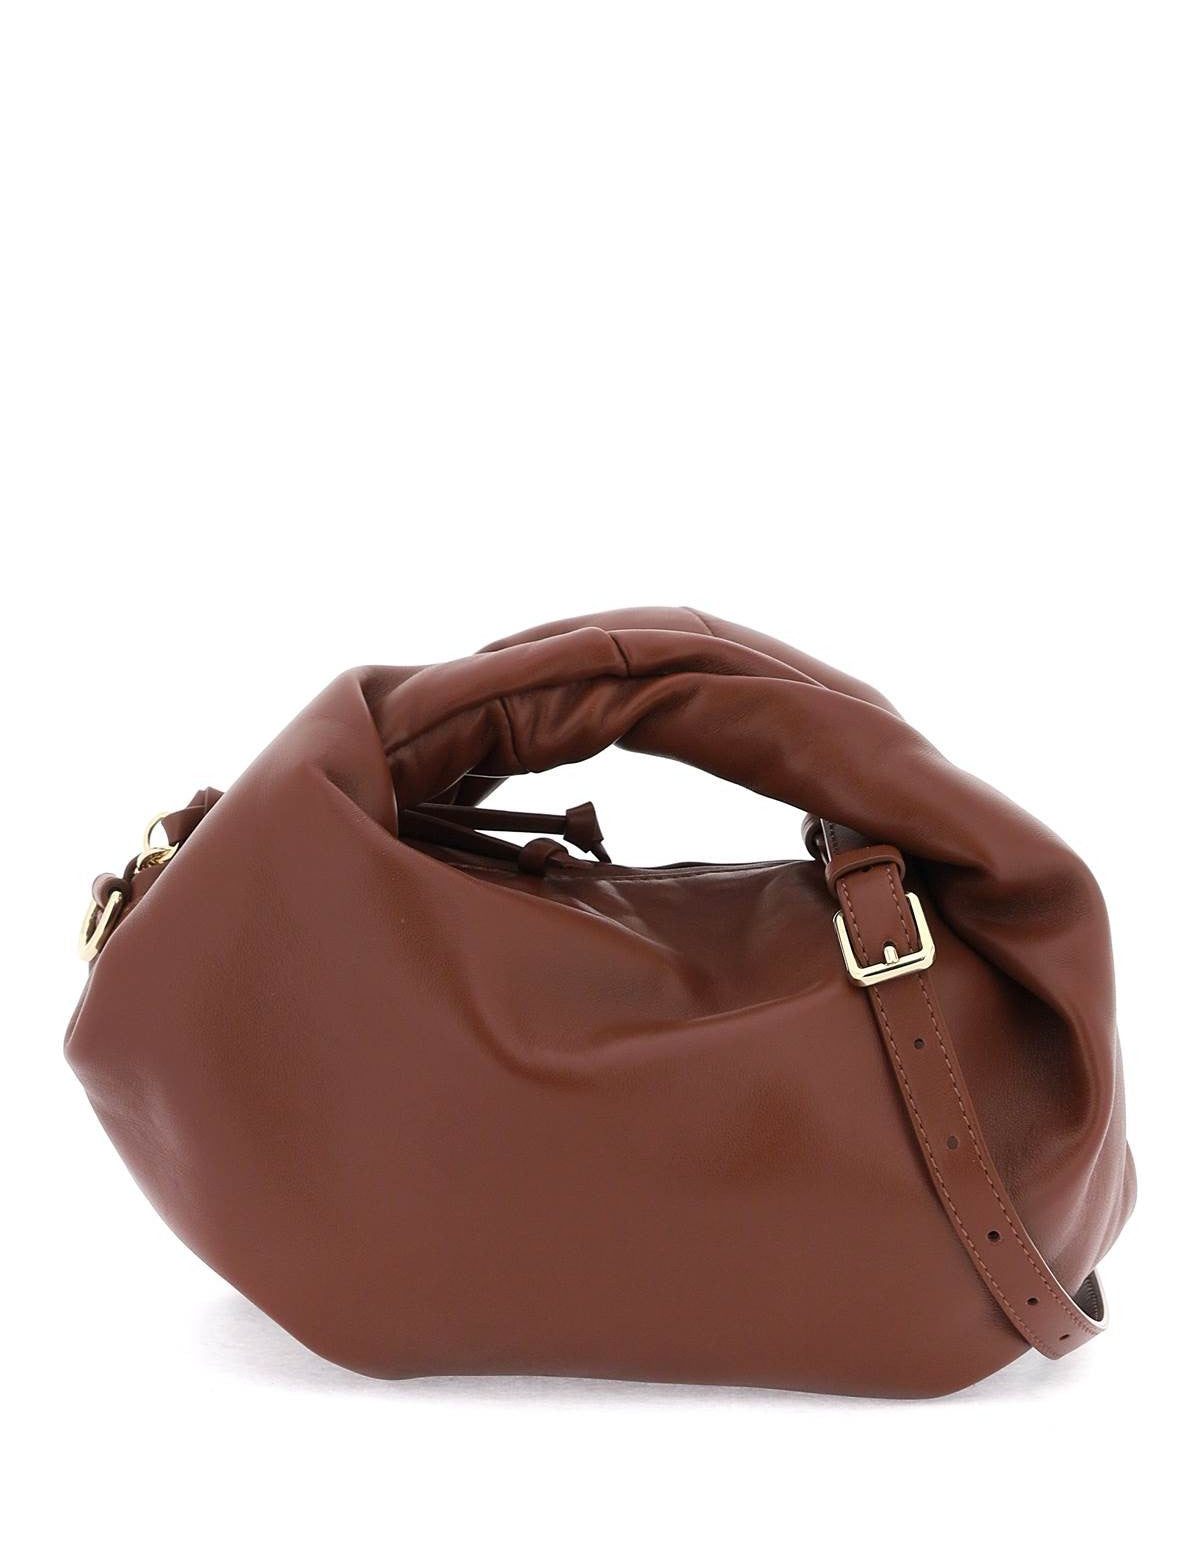 dries-van-noten-slouchy-leather-handbag-with-a_3a6f1fe3-6be7-4088-9c0e-1aed135e6c99.jpg